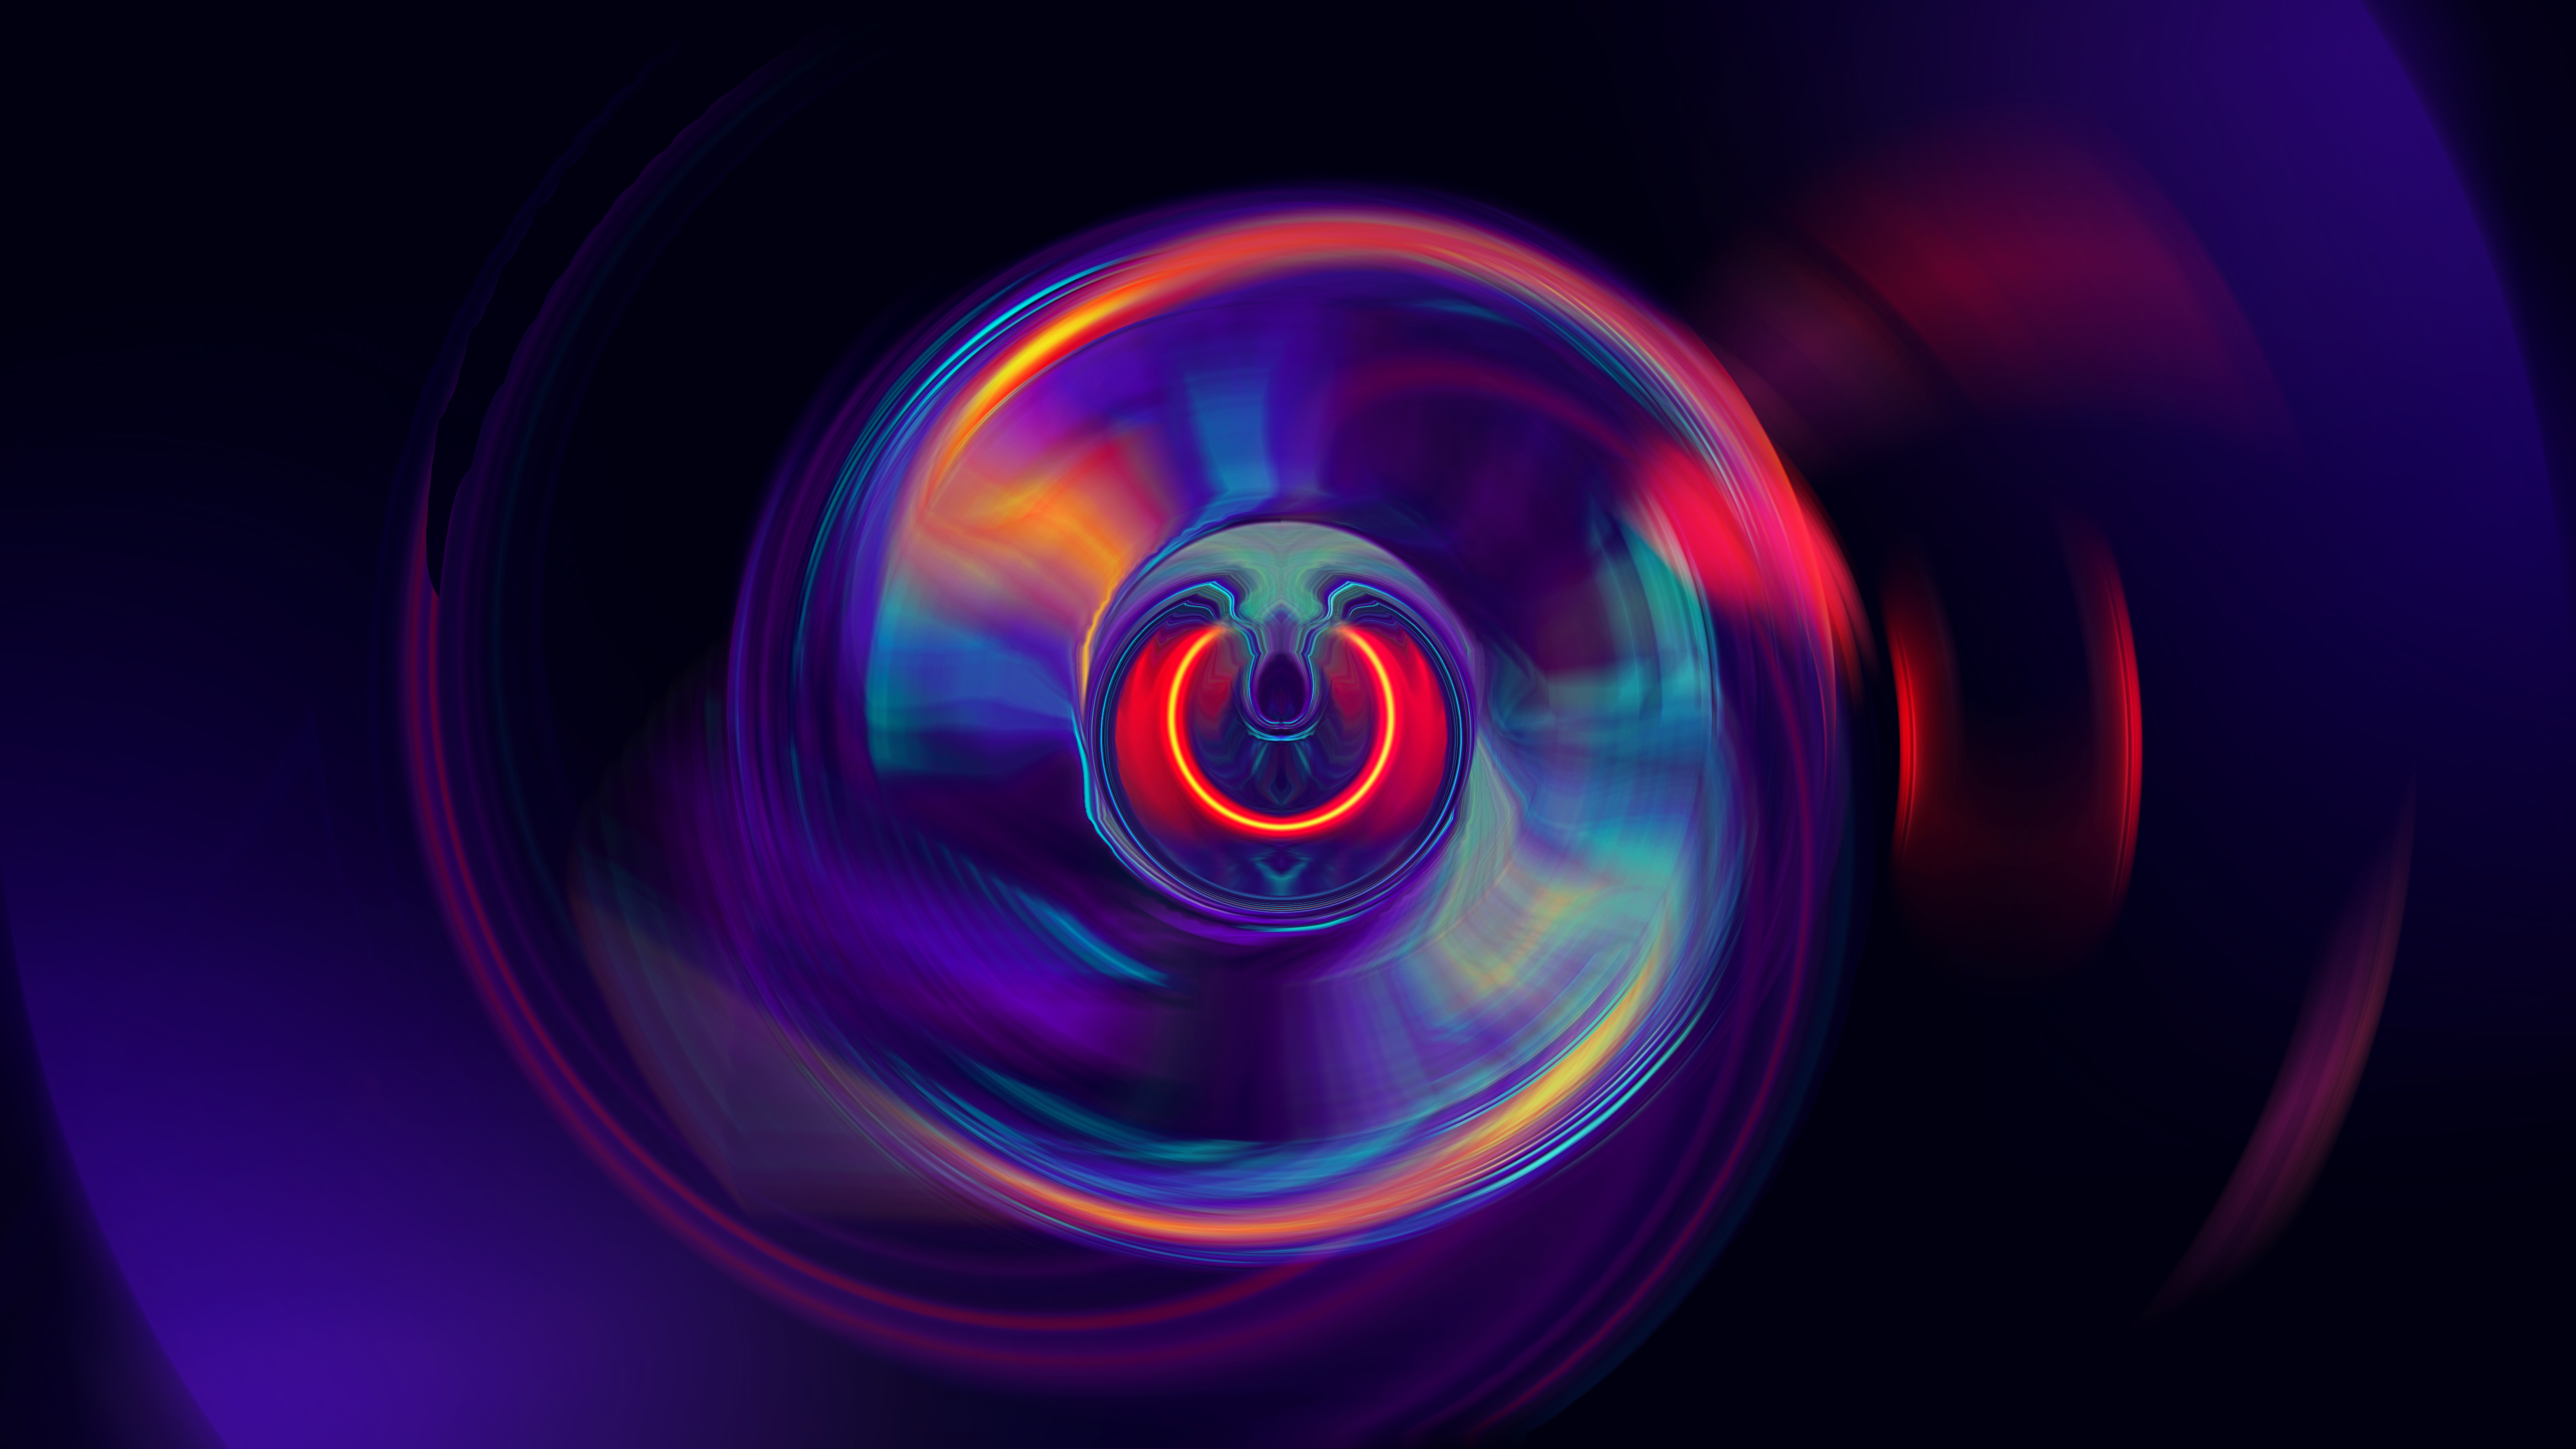 Abstract Spiral 5120x2880